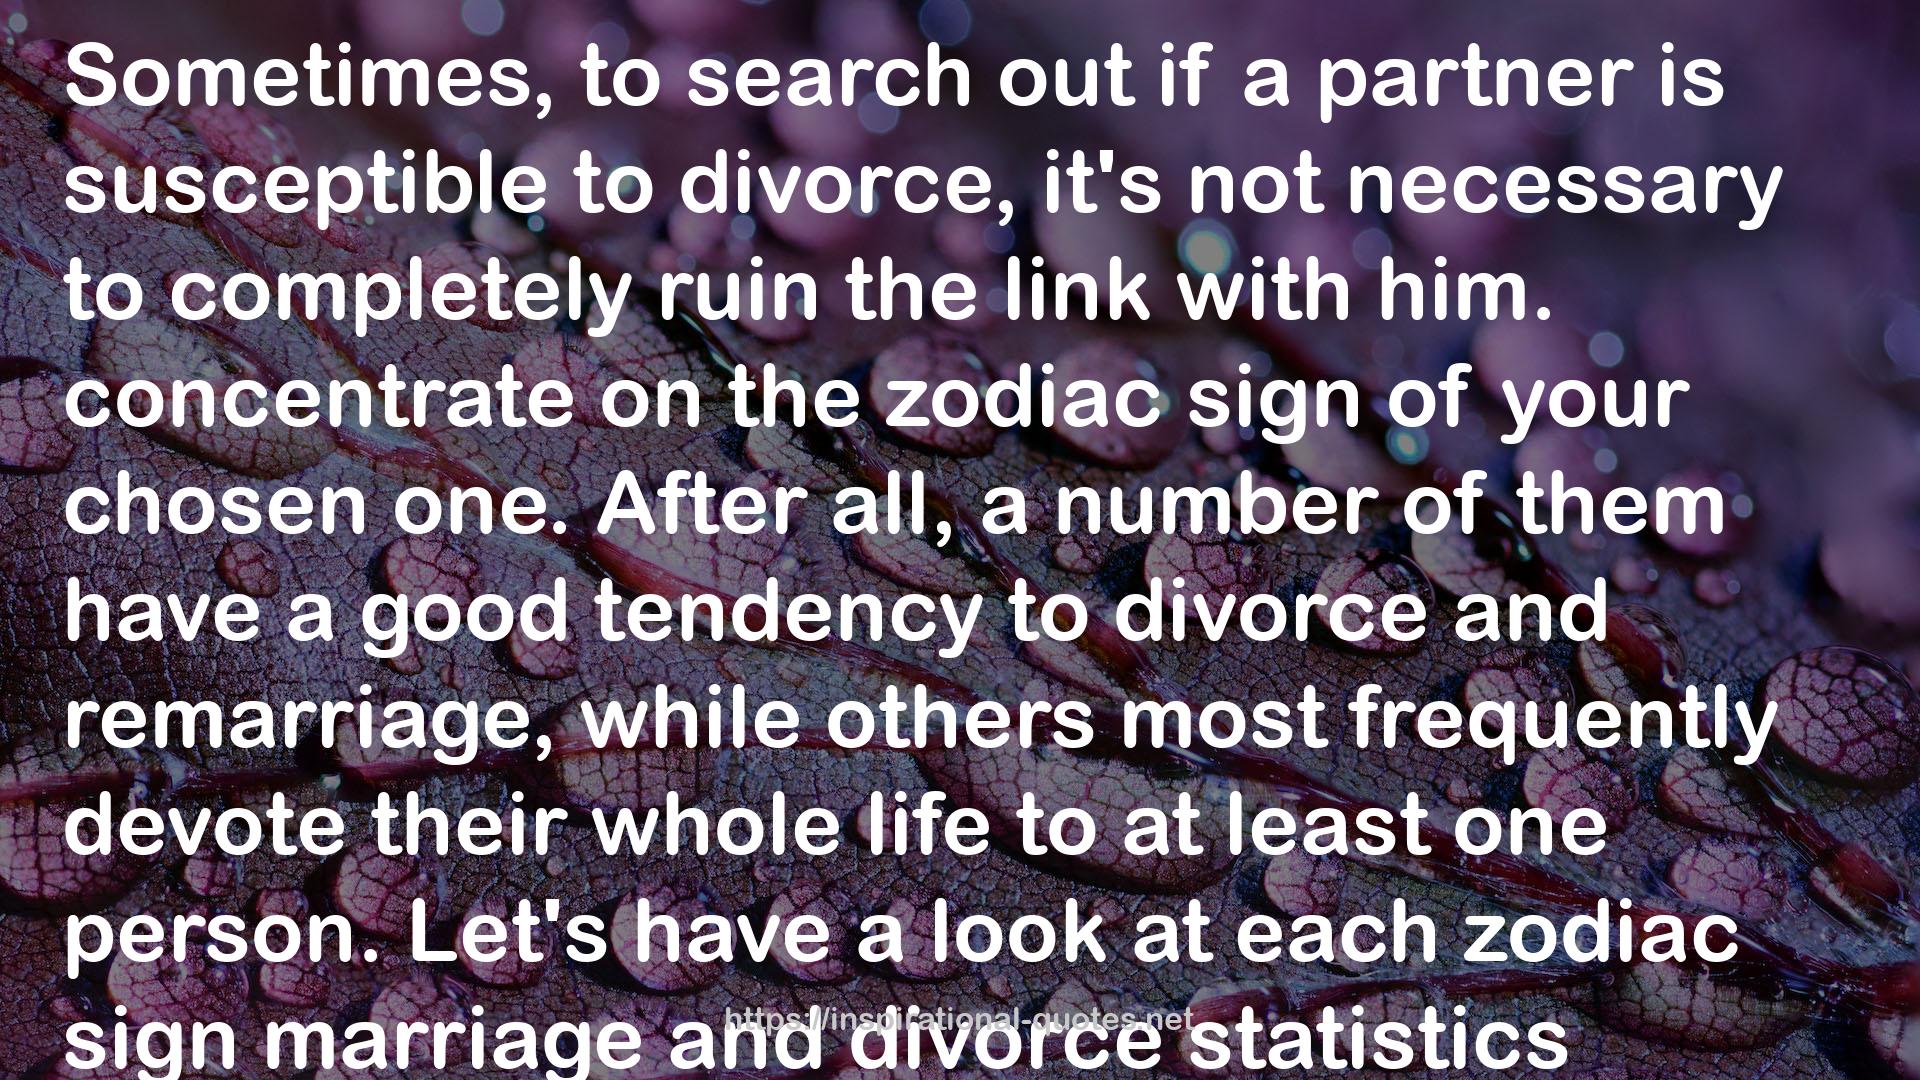 Zodiac Signs Marriage and Divorce Statistics QUOTES